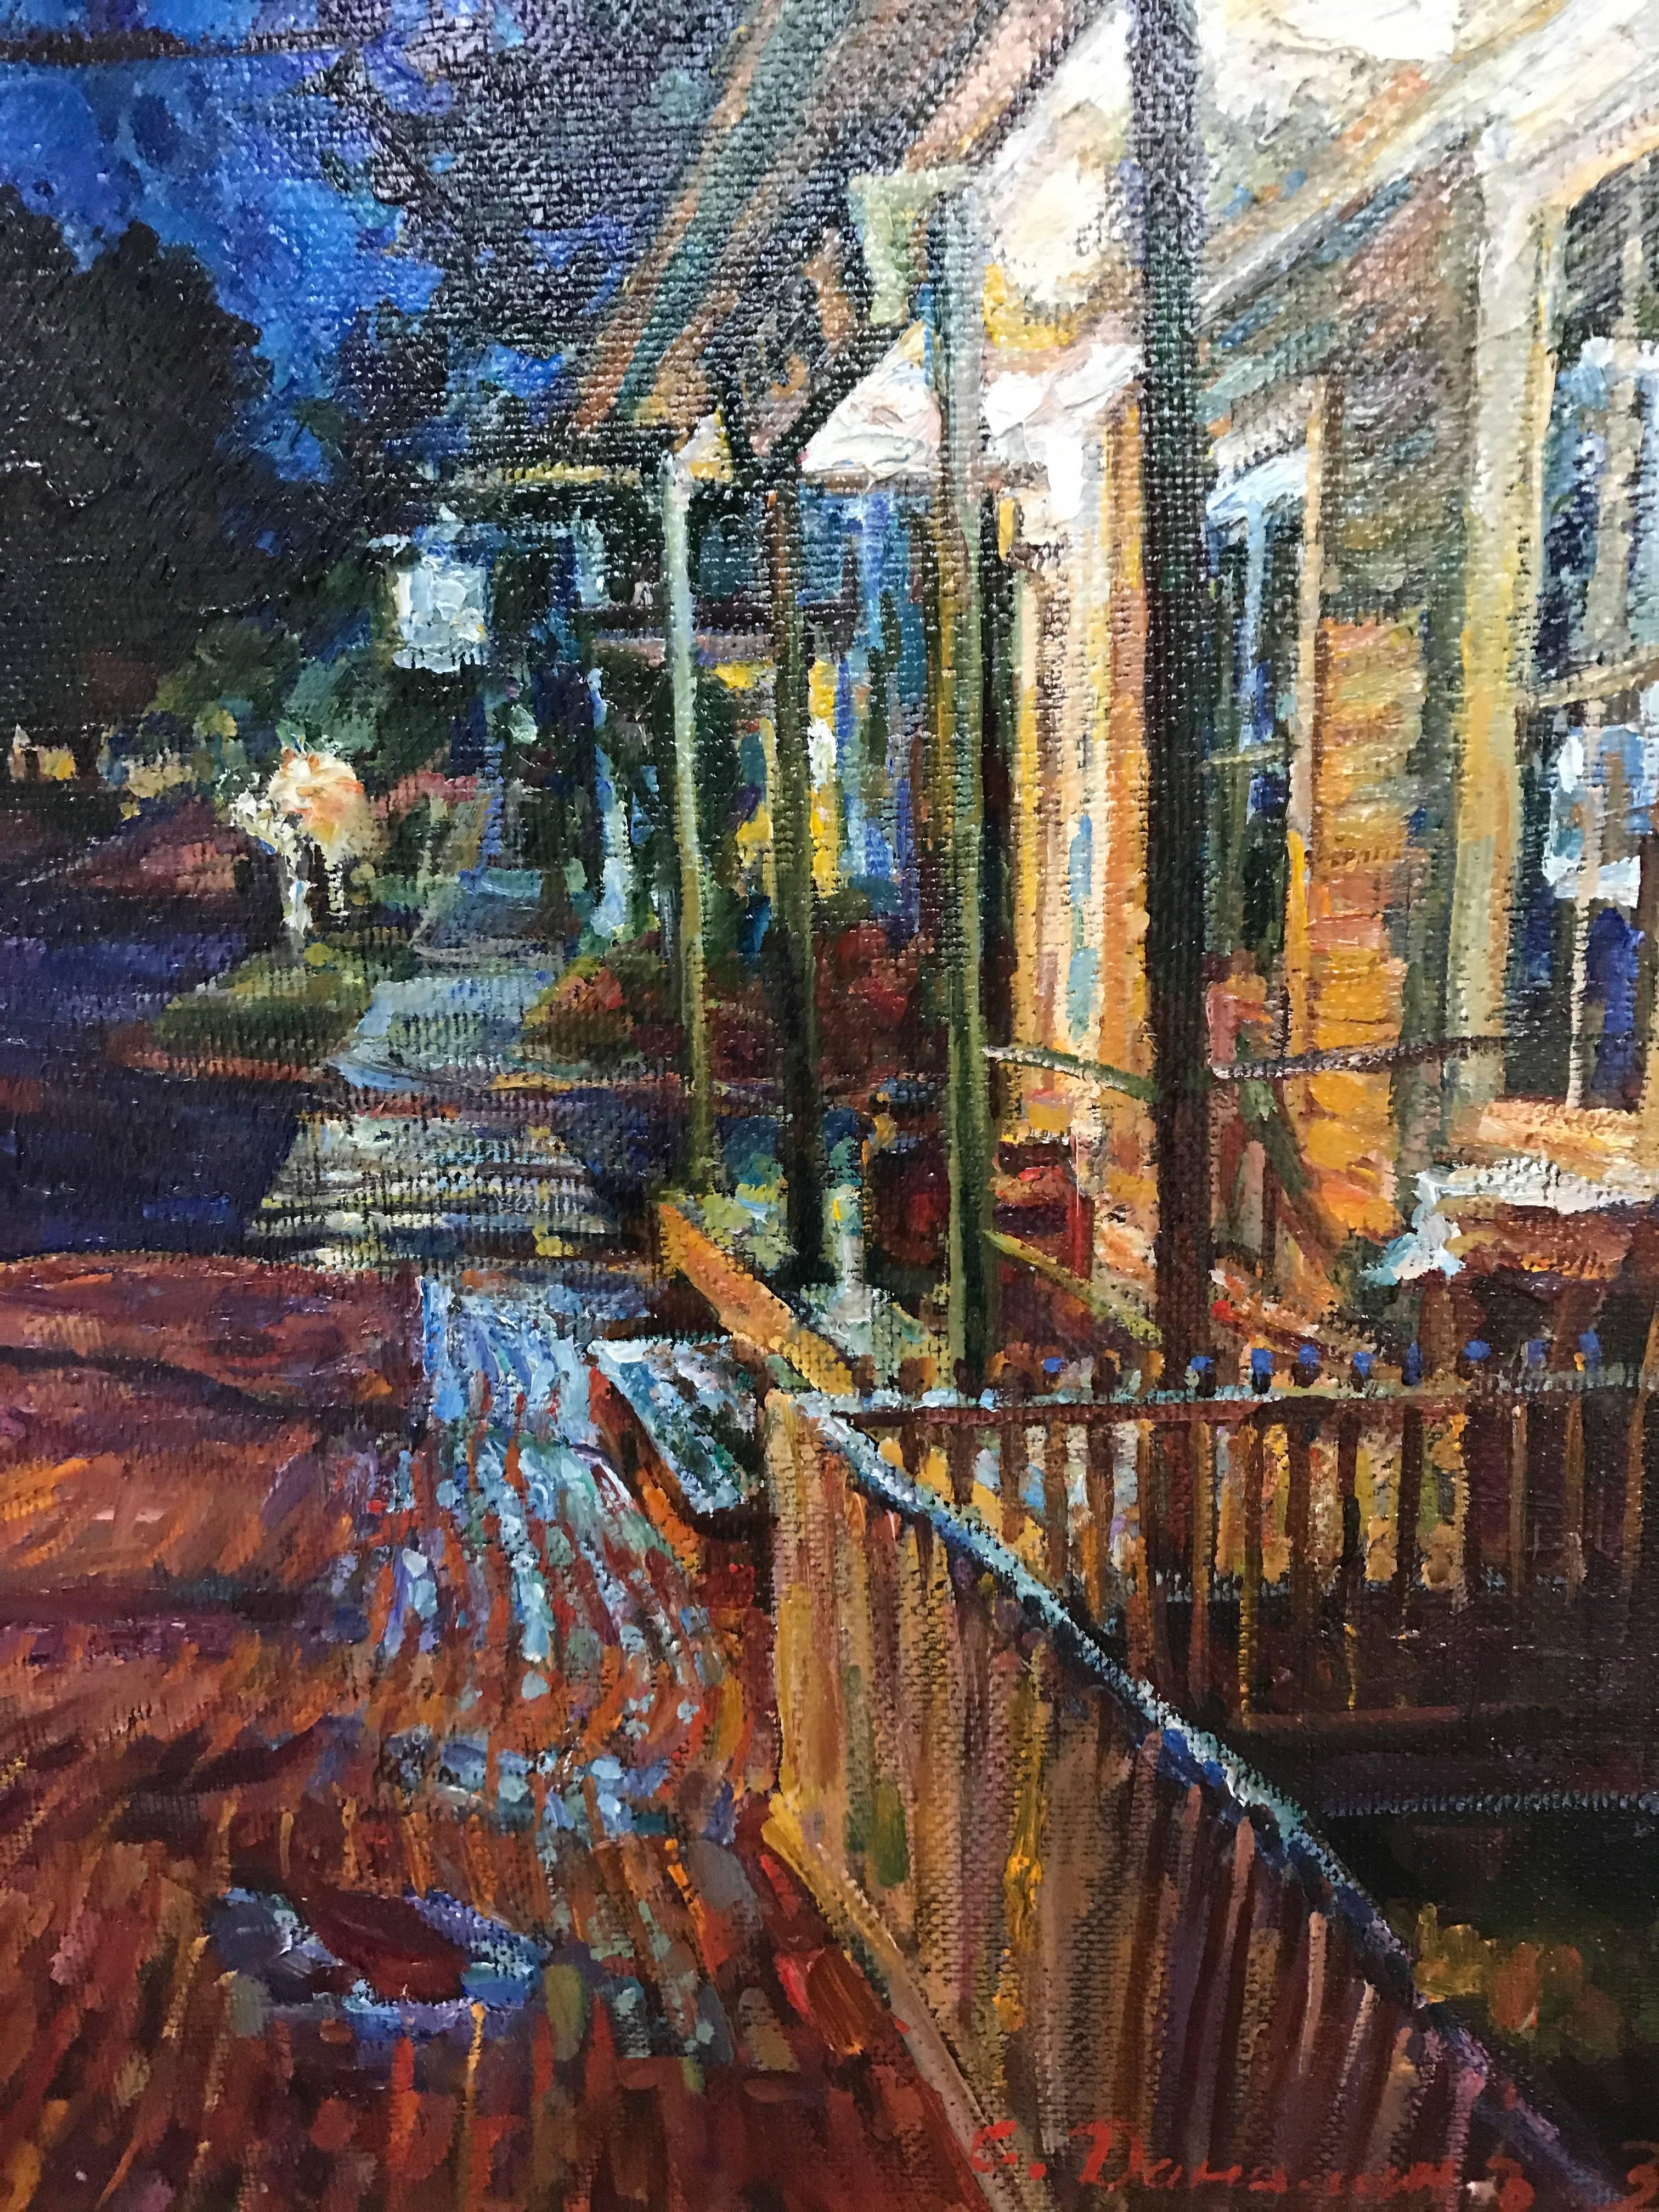 This impressionist oil on canvas was painted by Sergei Danilin in 2013 and depicts Main Street in Oldwick, NJ. and is titled 